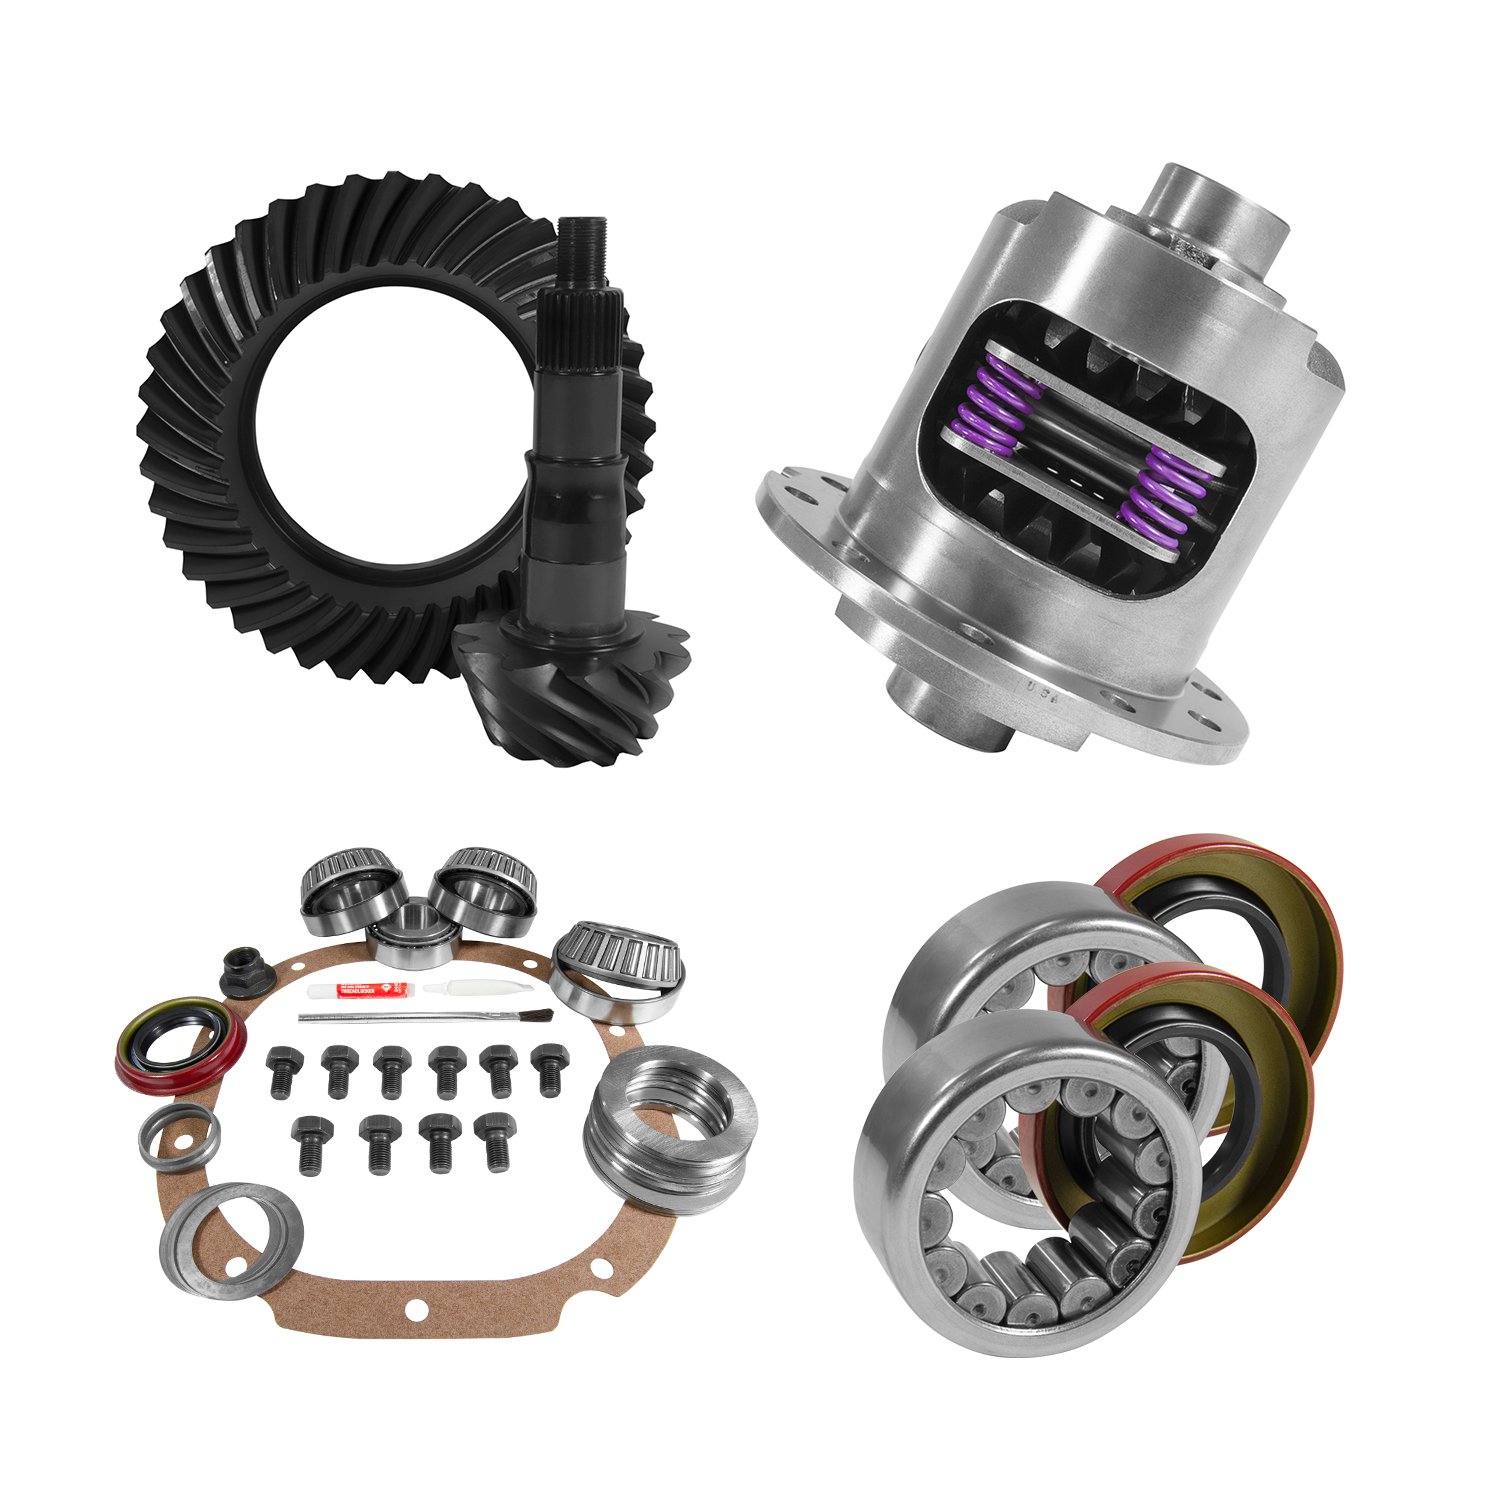 USA Standard 10765 8.8 in. Ford 4.88 Rear Ring & Pinion Install Kit, 31Spl Posi, 2.99 in. Axle Bearings